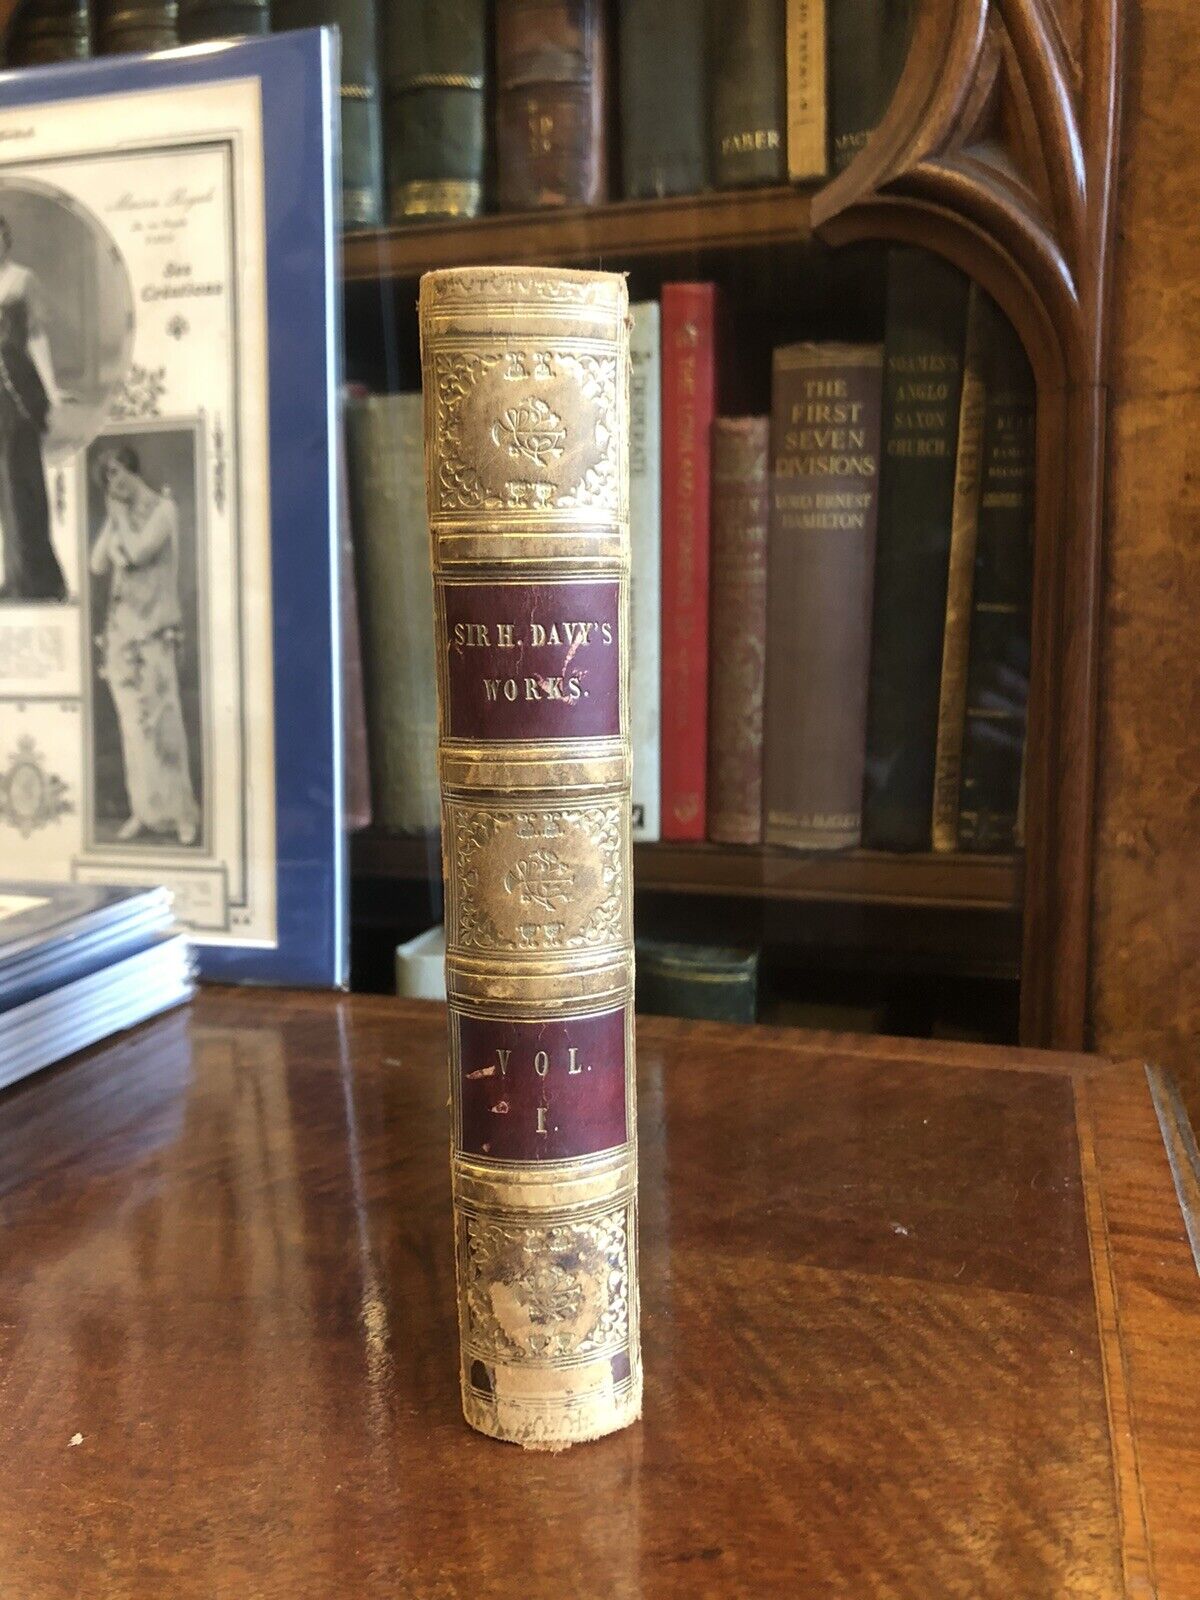 1839 Memoirs of the Life of Sir Humphry Davy (Davy Safety Lamp Inventor) Science